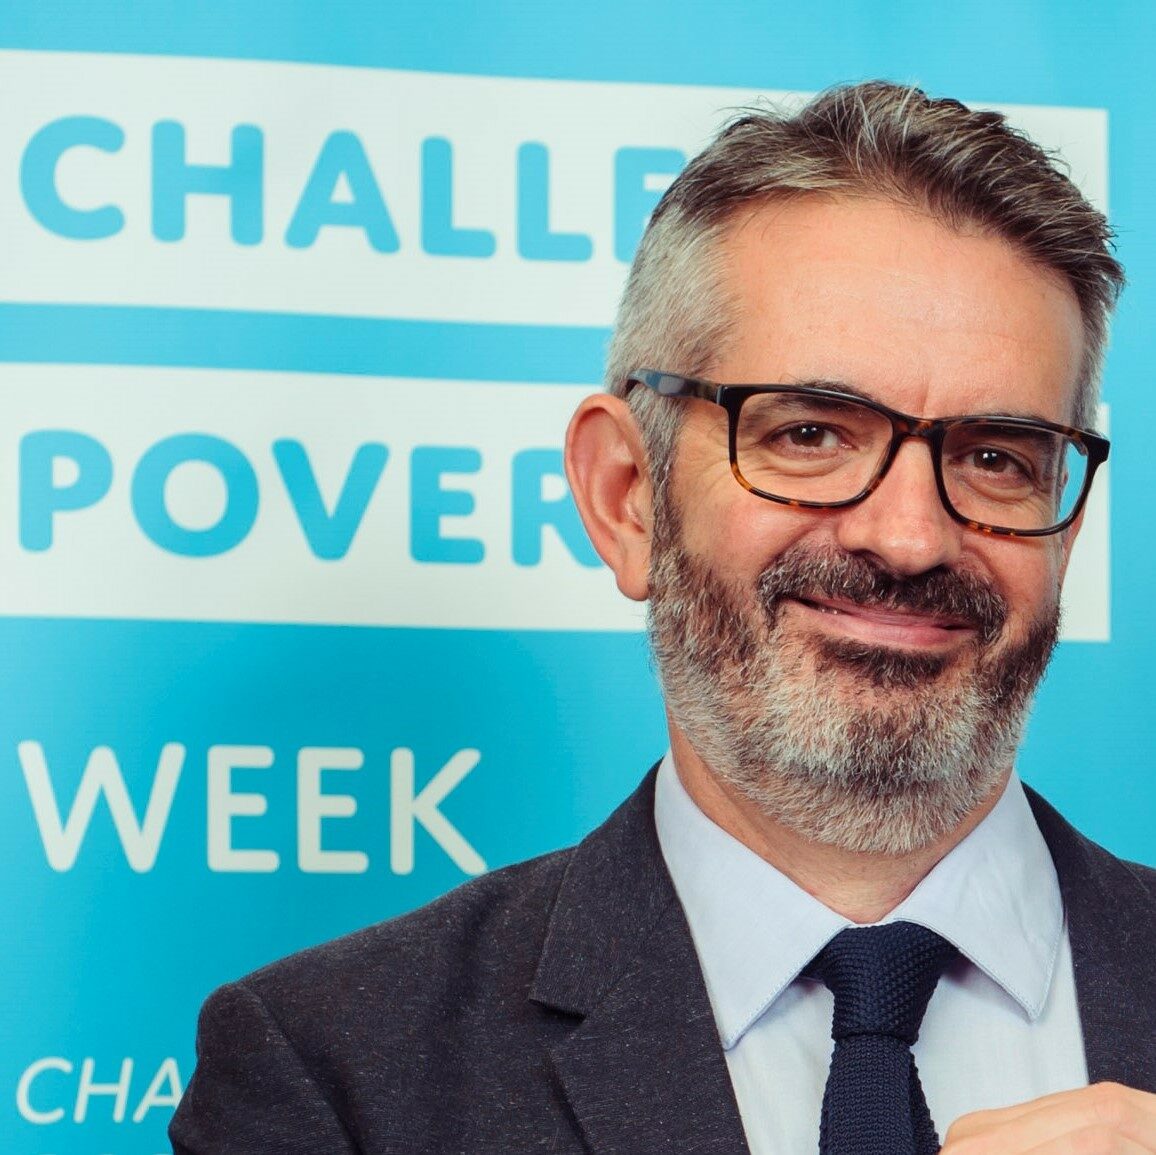 EDINBURGH, UK - 4th October 2018: Scottish MSP's show their support for Challenge Poverty Week. A debate will take place in parliament highlighting the problem of poverty in Scotland and comes as new figures published on Tuesday showed that one in four children are locked in poverty.  (Photograph: MAVERICK PHOTO AGENCY)

Full press release below.

Poverty Alliance news release
For immediate use: Thursday 4th October

Photo to follow at 1.30pm 
Party leaders unite to challenge poverty
Today at the Scottish Parliament leaders of all the political parties represented in Holyrood will join forces to highlight the problem of poverty in Scotland and showcase the solutions we can all get behind to solve it. Leaders will unite for a photocall ahead of a debate in Parliament on the solutions to tackling poverty.[1]
The debate is part of ScotlandÕs biggest ever Challenge Poverty Week.  From upcycling classes and family fun days to workshops on innovative alternatives to food banks, more than 100 events are happening this week. Academics, leading NGOs, churches, community groups, schools and leaders of all the major political parties are among those to show their support for the campaign. 
NHS Health Scotland, Shelter, NSPCC Scotland, Close the Gap, Refugee Survival Trust, The Church of Scotland and Citizens Advice Scotland are among those joining forces to highlight the grip poverty has on peopleÕs lives and the policies we need to solve the problem.  
It comes as new figures published on Tuesday showed that one in four children are locked in poverty and that the majority of these children are in families where someone is disabled or parents are finding it difficult to juggle work and childcare. [2]
Peter Kelly, Director of the Poverty Alliance said:

ÒIn our society we believe in doing the right thing. And yet, weÕre letting increasing numbers of people get swept up in the rising tide of poverty. 
ÒAll across Scotland people from all walks of life are coming together to